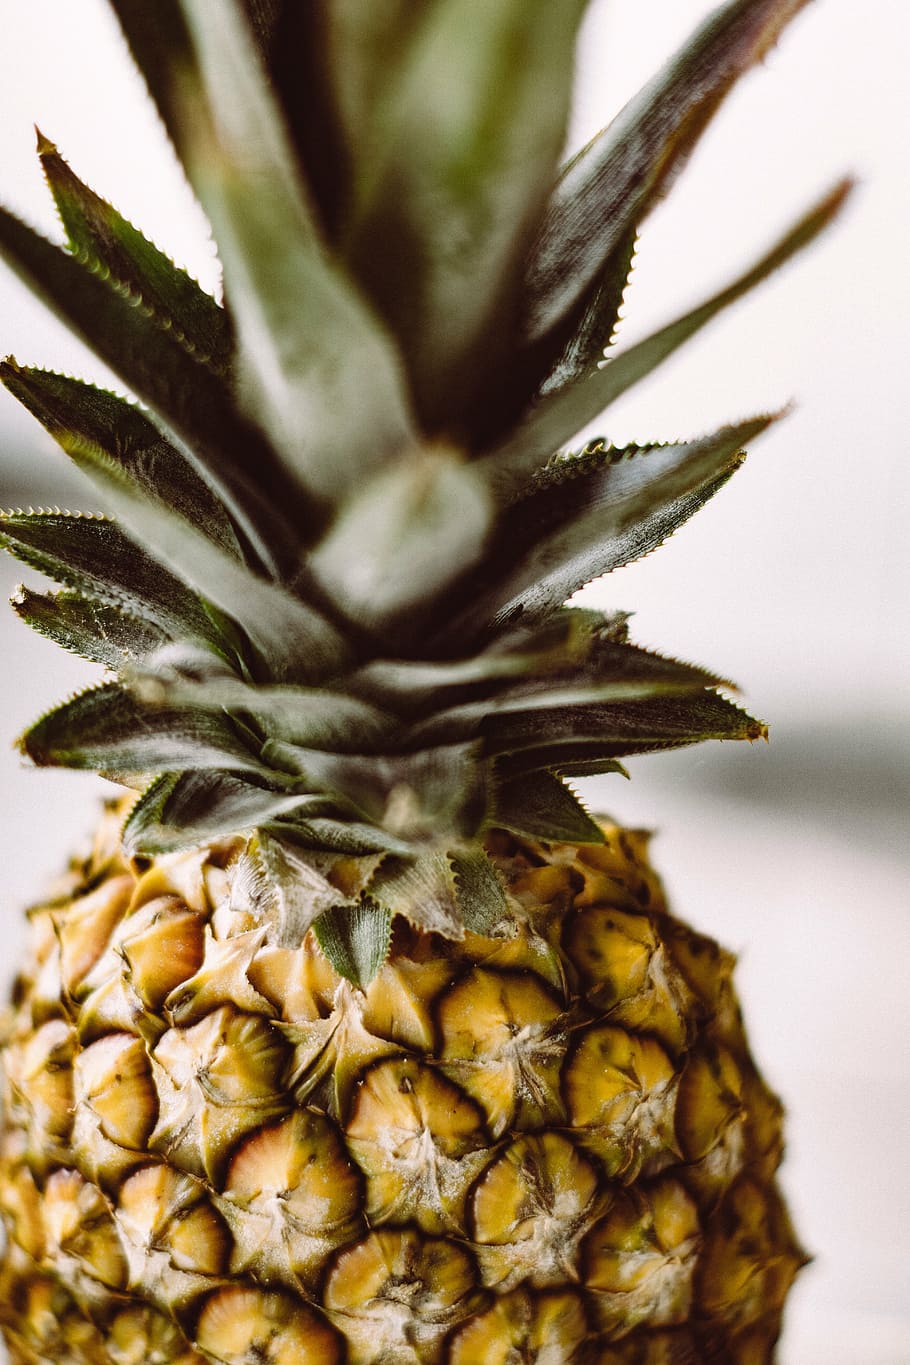 pineapple, dessert, appetizer, fruit, juice, crop, tropical climate, close-up, food and drink, healthy eating